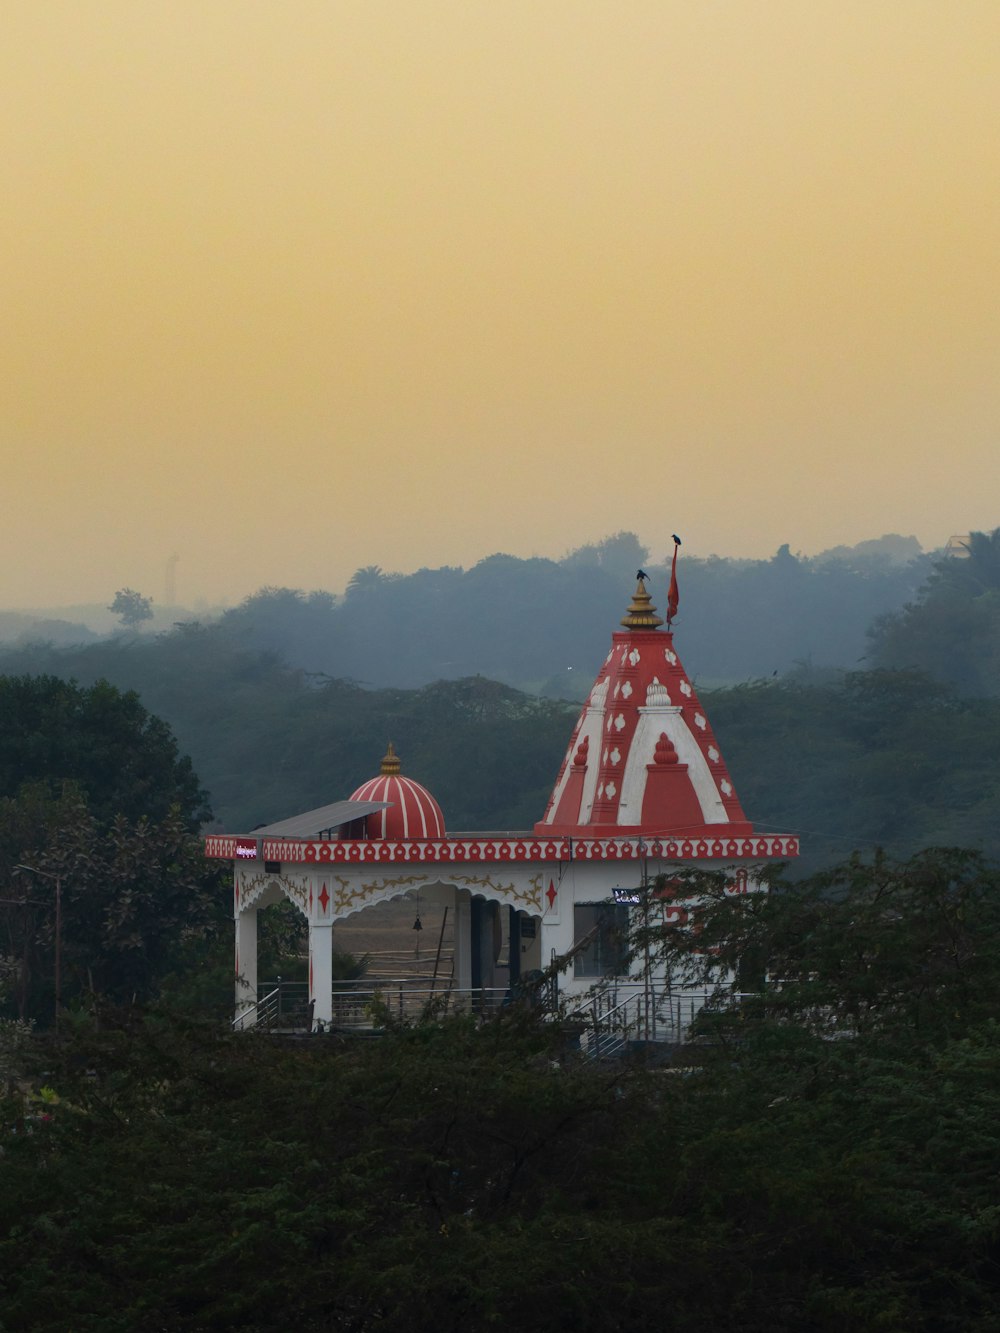 a red and white gazebo in the middle of a forest